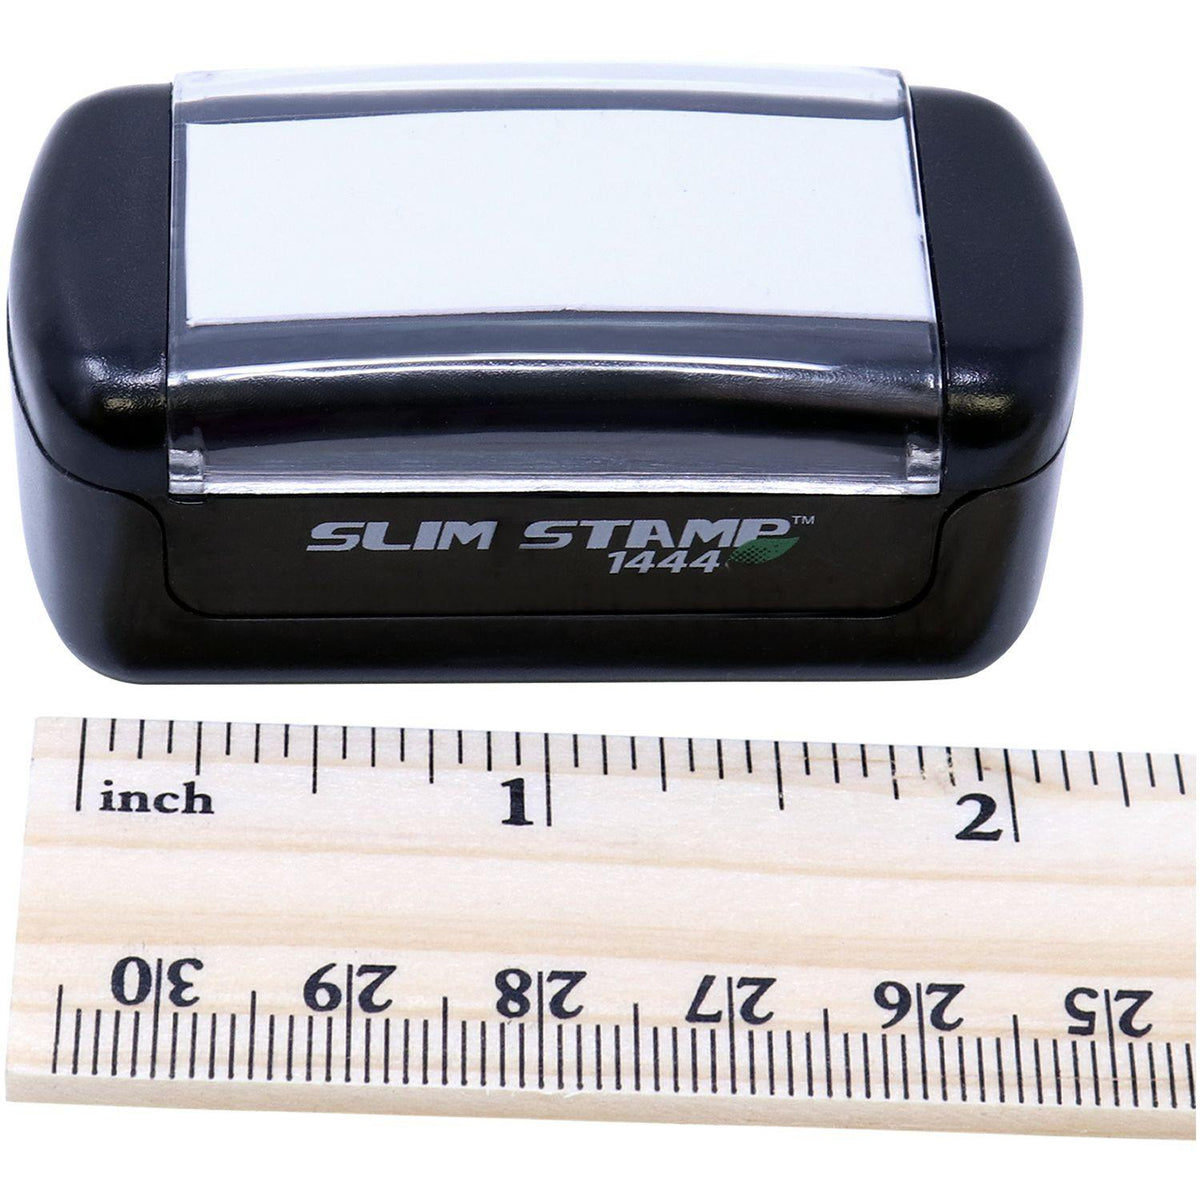 Slim Pre Inked Broker Copy Stamp - Engineer Seal Stamps - Brand_Slim, Impression Size_Small, Stamp Type_Pre-Inked Stamp, Type of Use_Finance